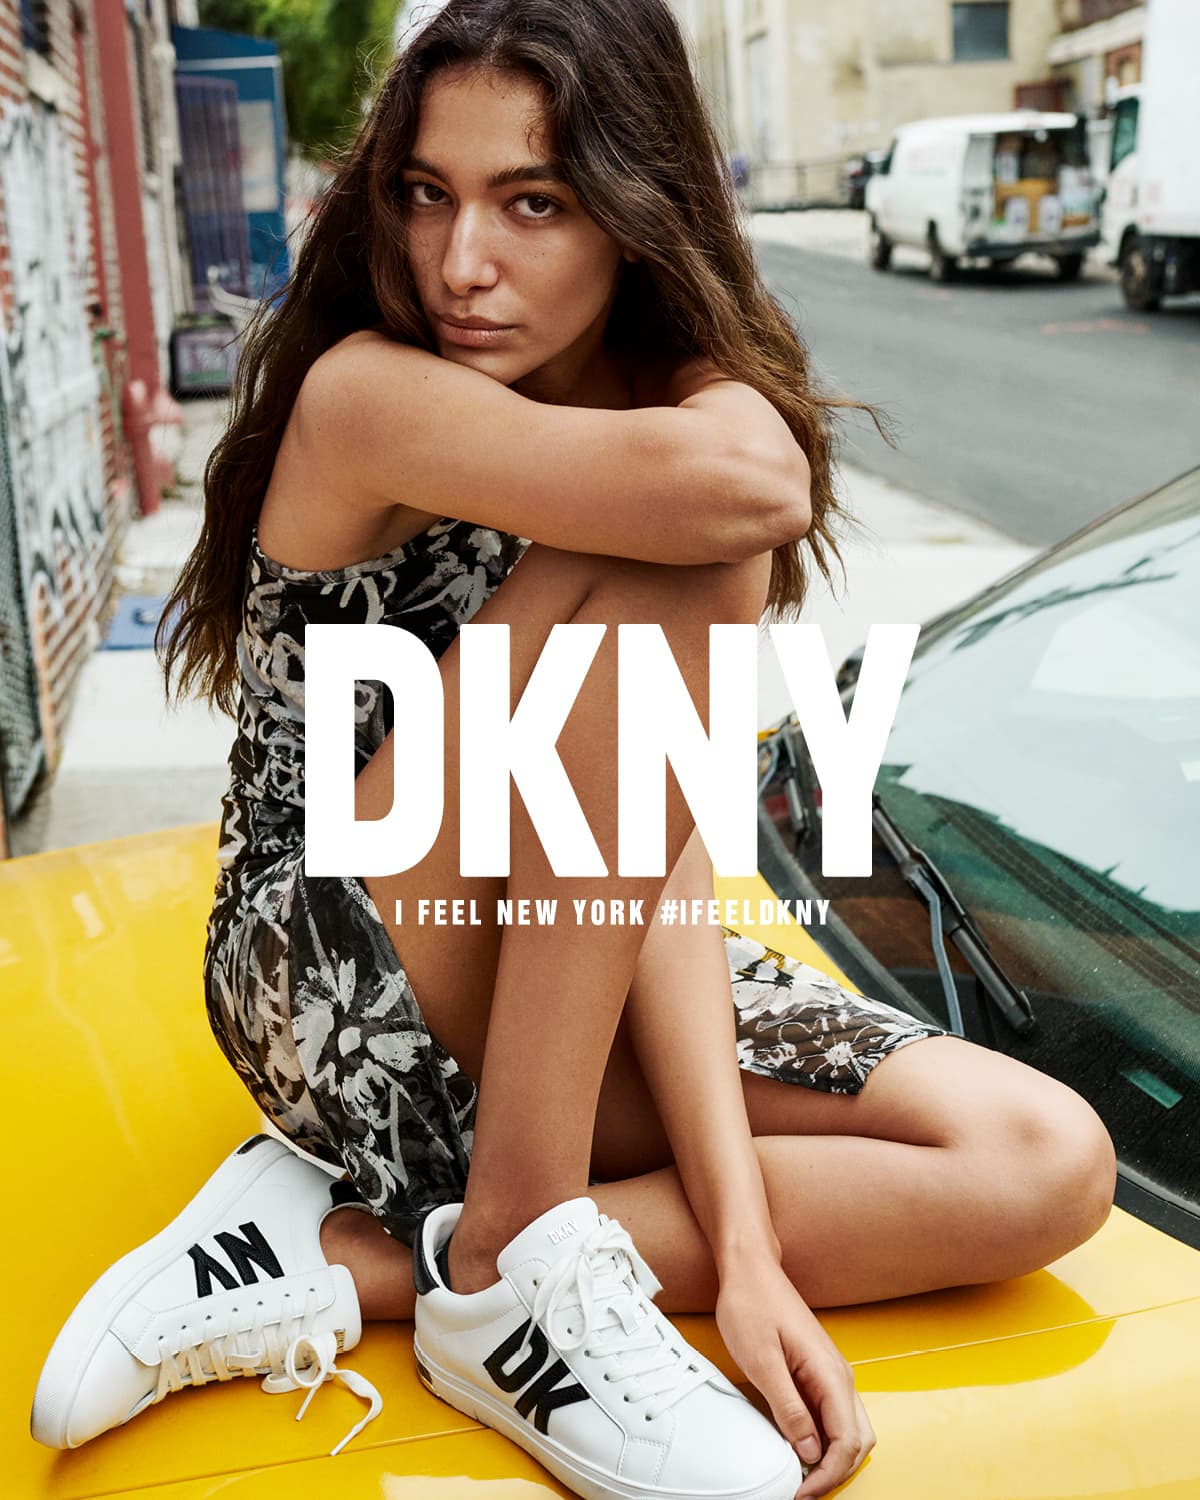 DKNY Spring 2023 Ad Campaign Review